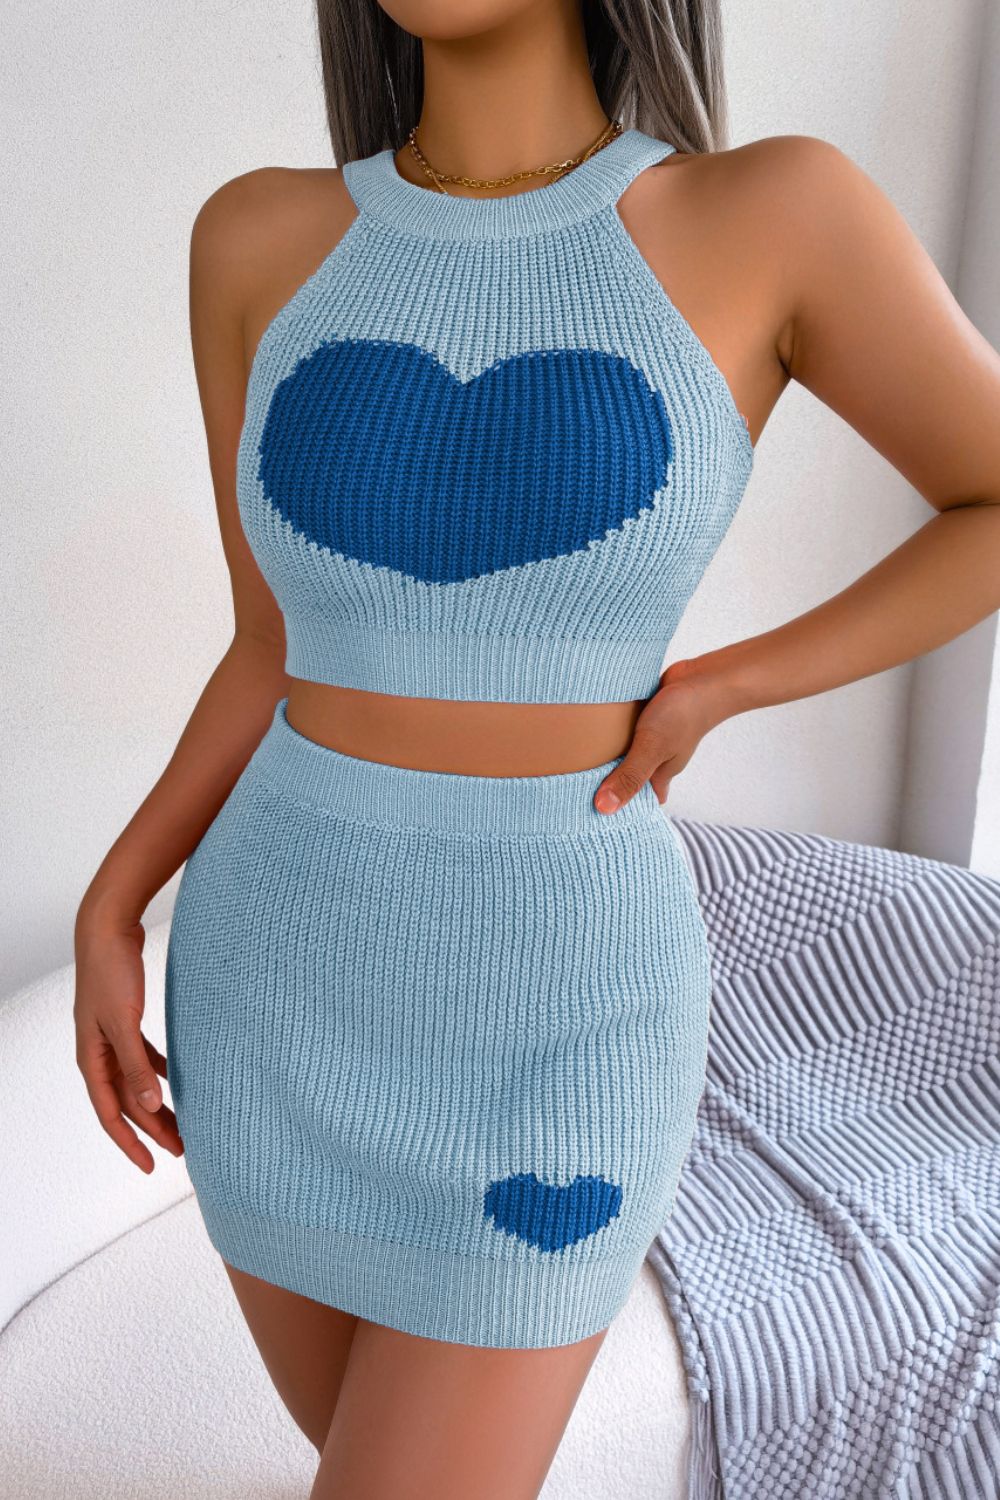 Fashionista Heart Ribbed Sleeveless Knit Top and Skirt Set